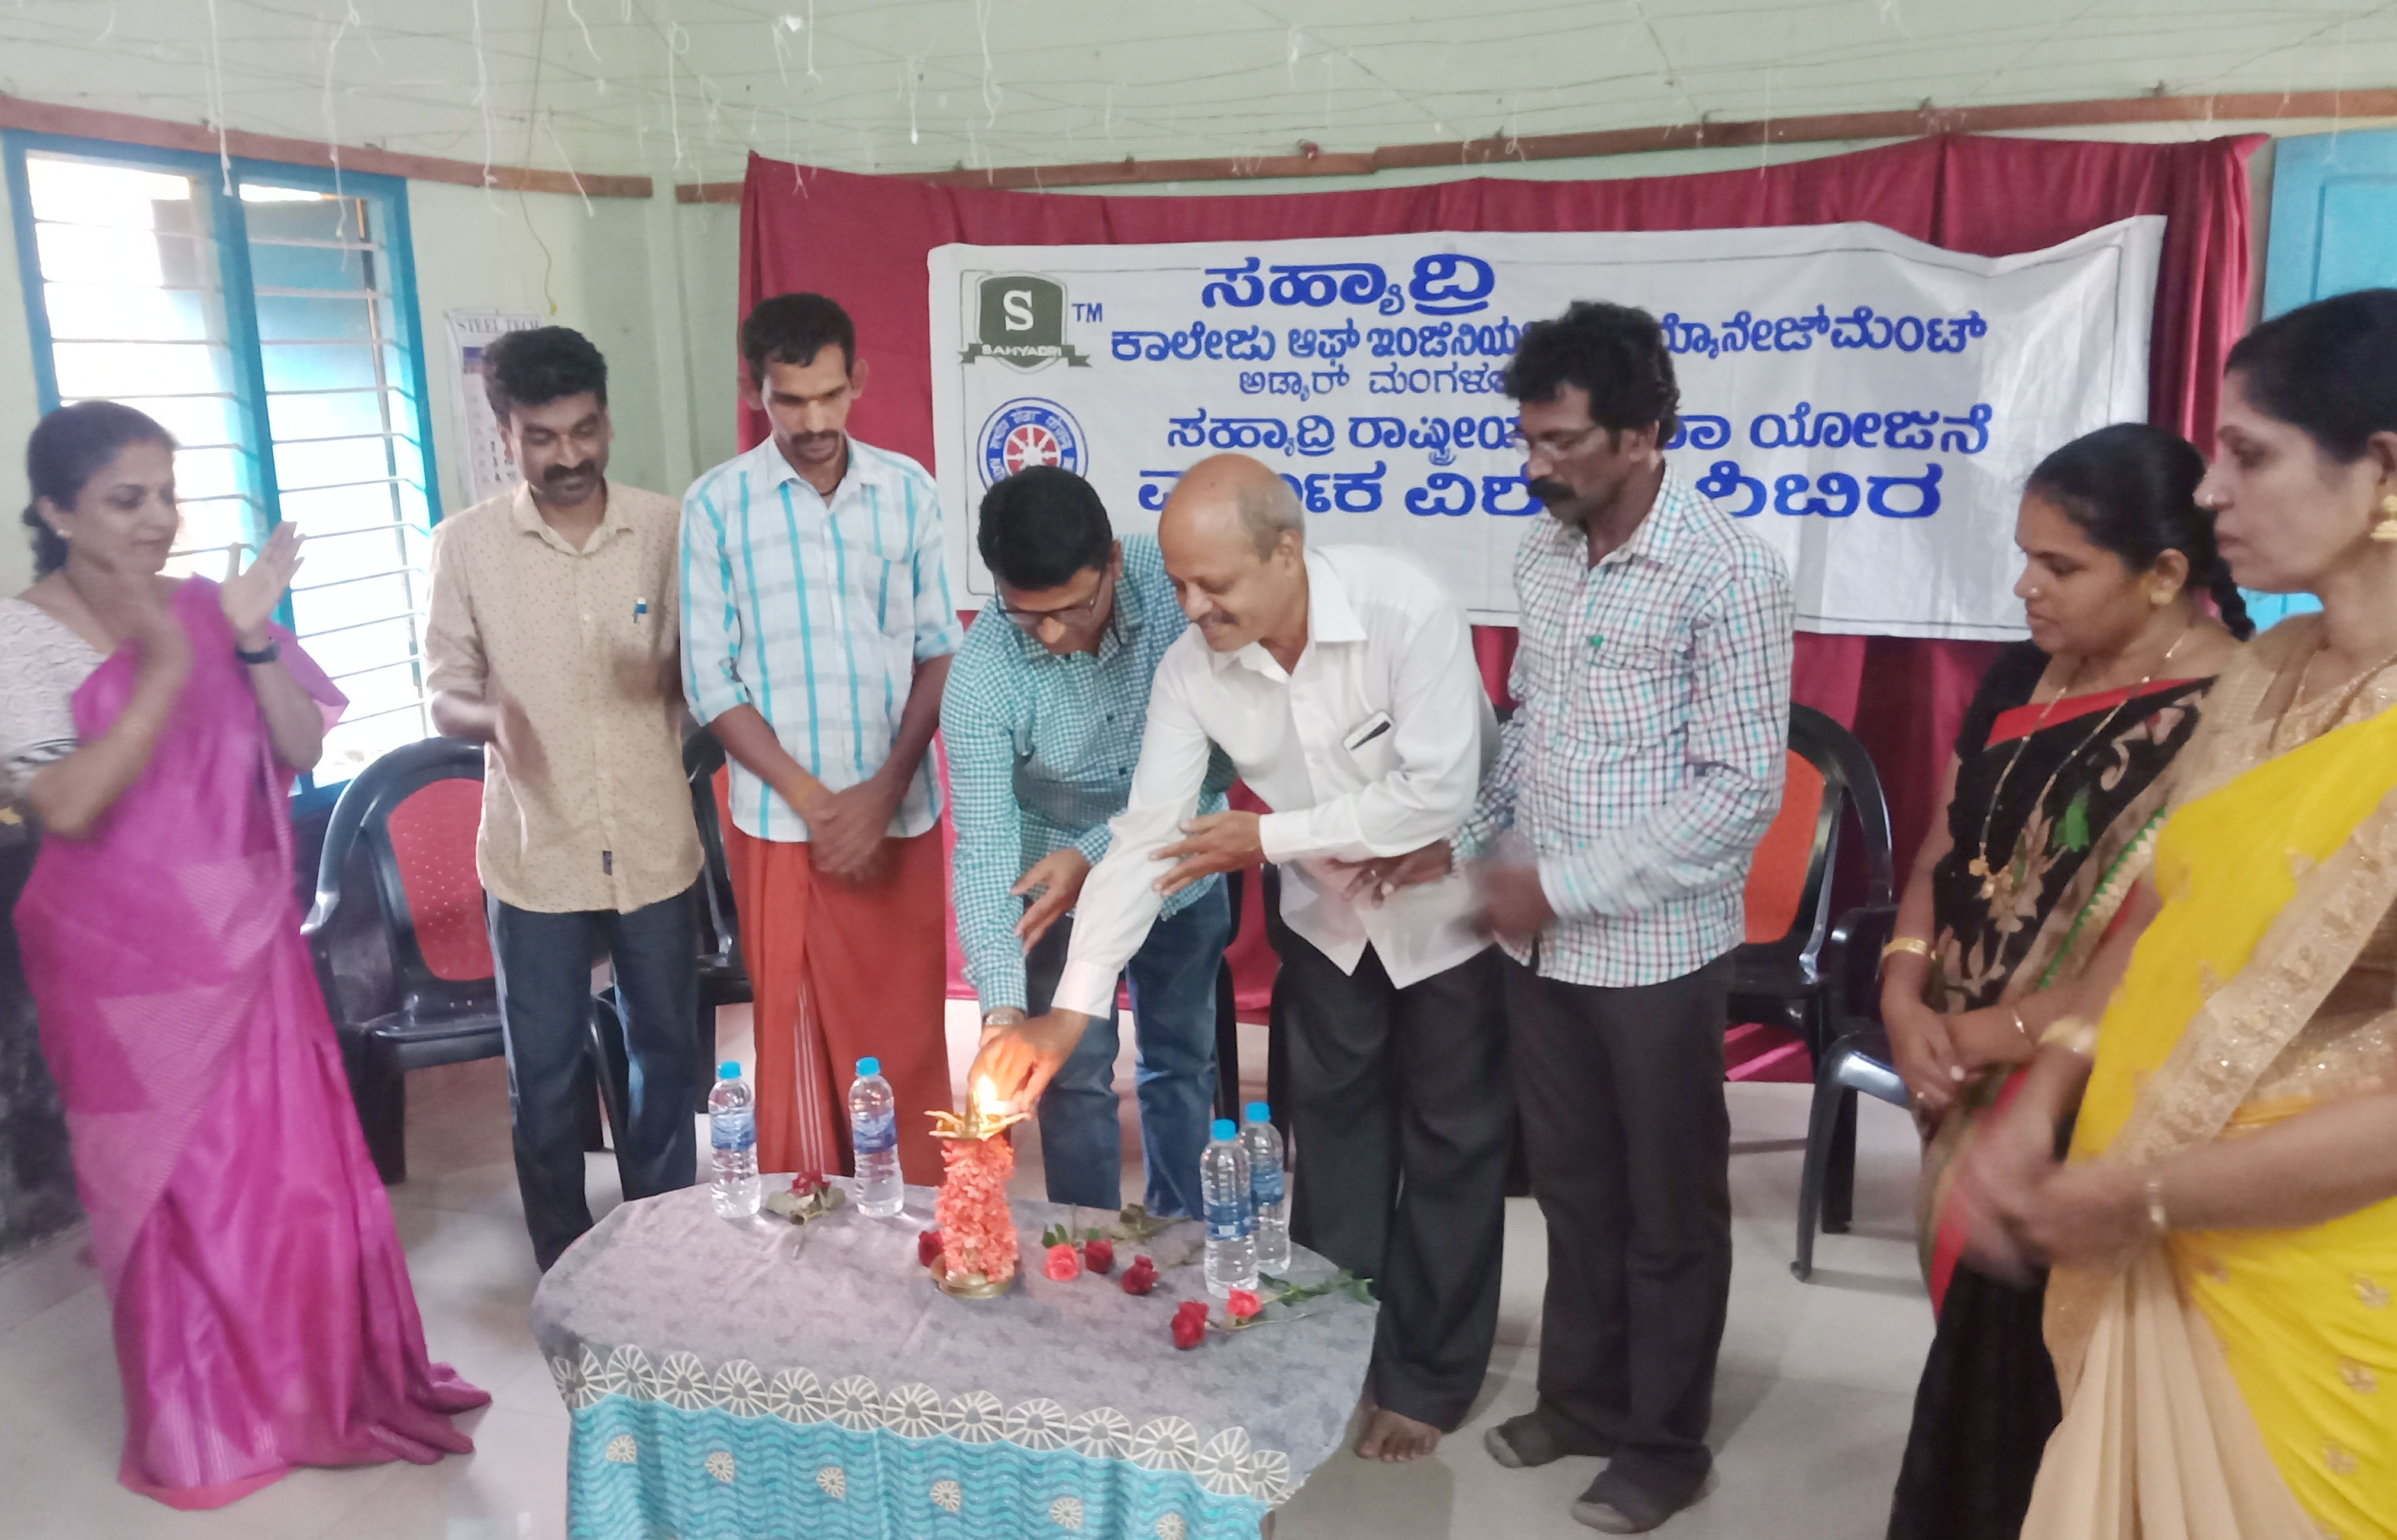 Sahyadri College NSS unit conducts First NSS special camp at Kumpala Government School. 